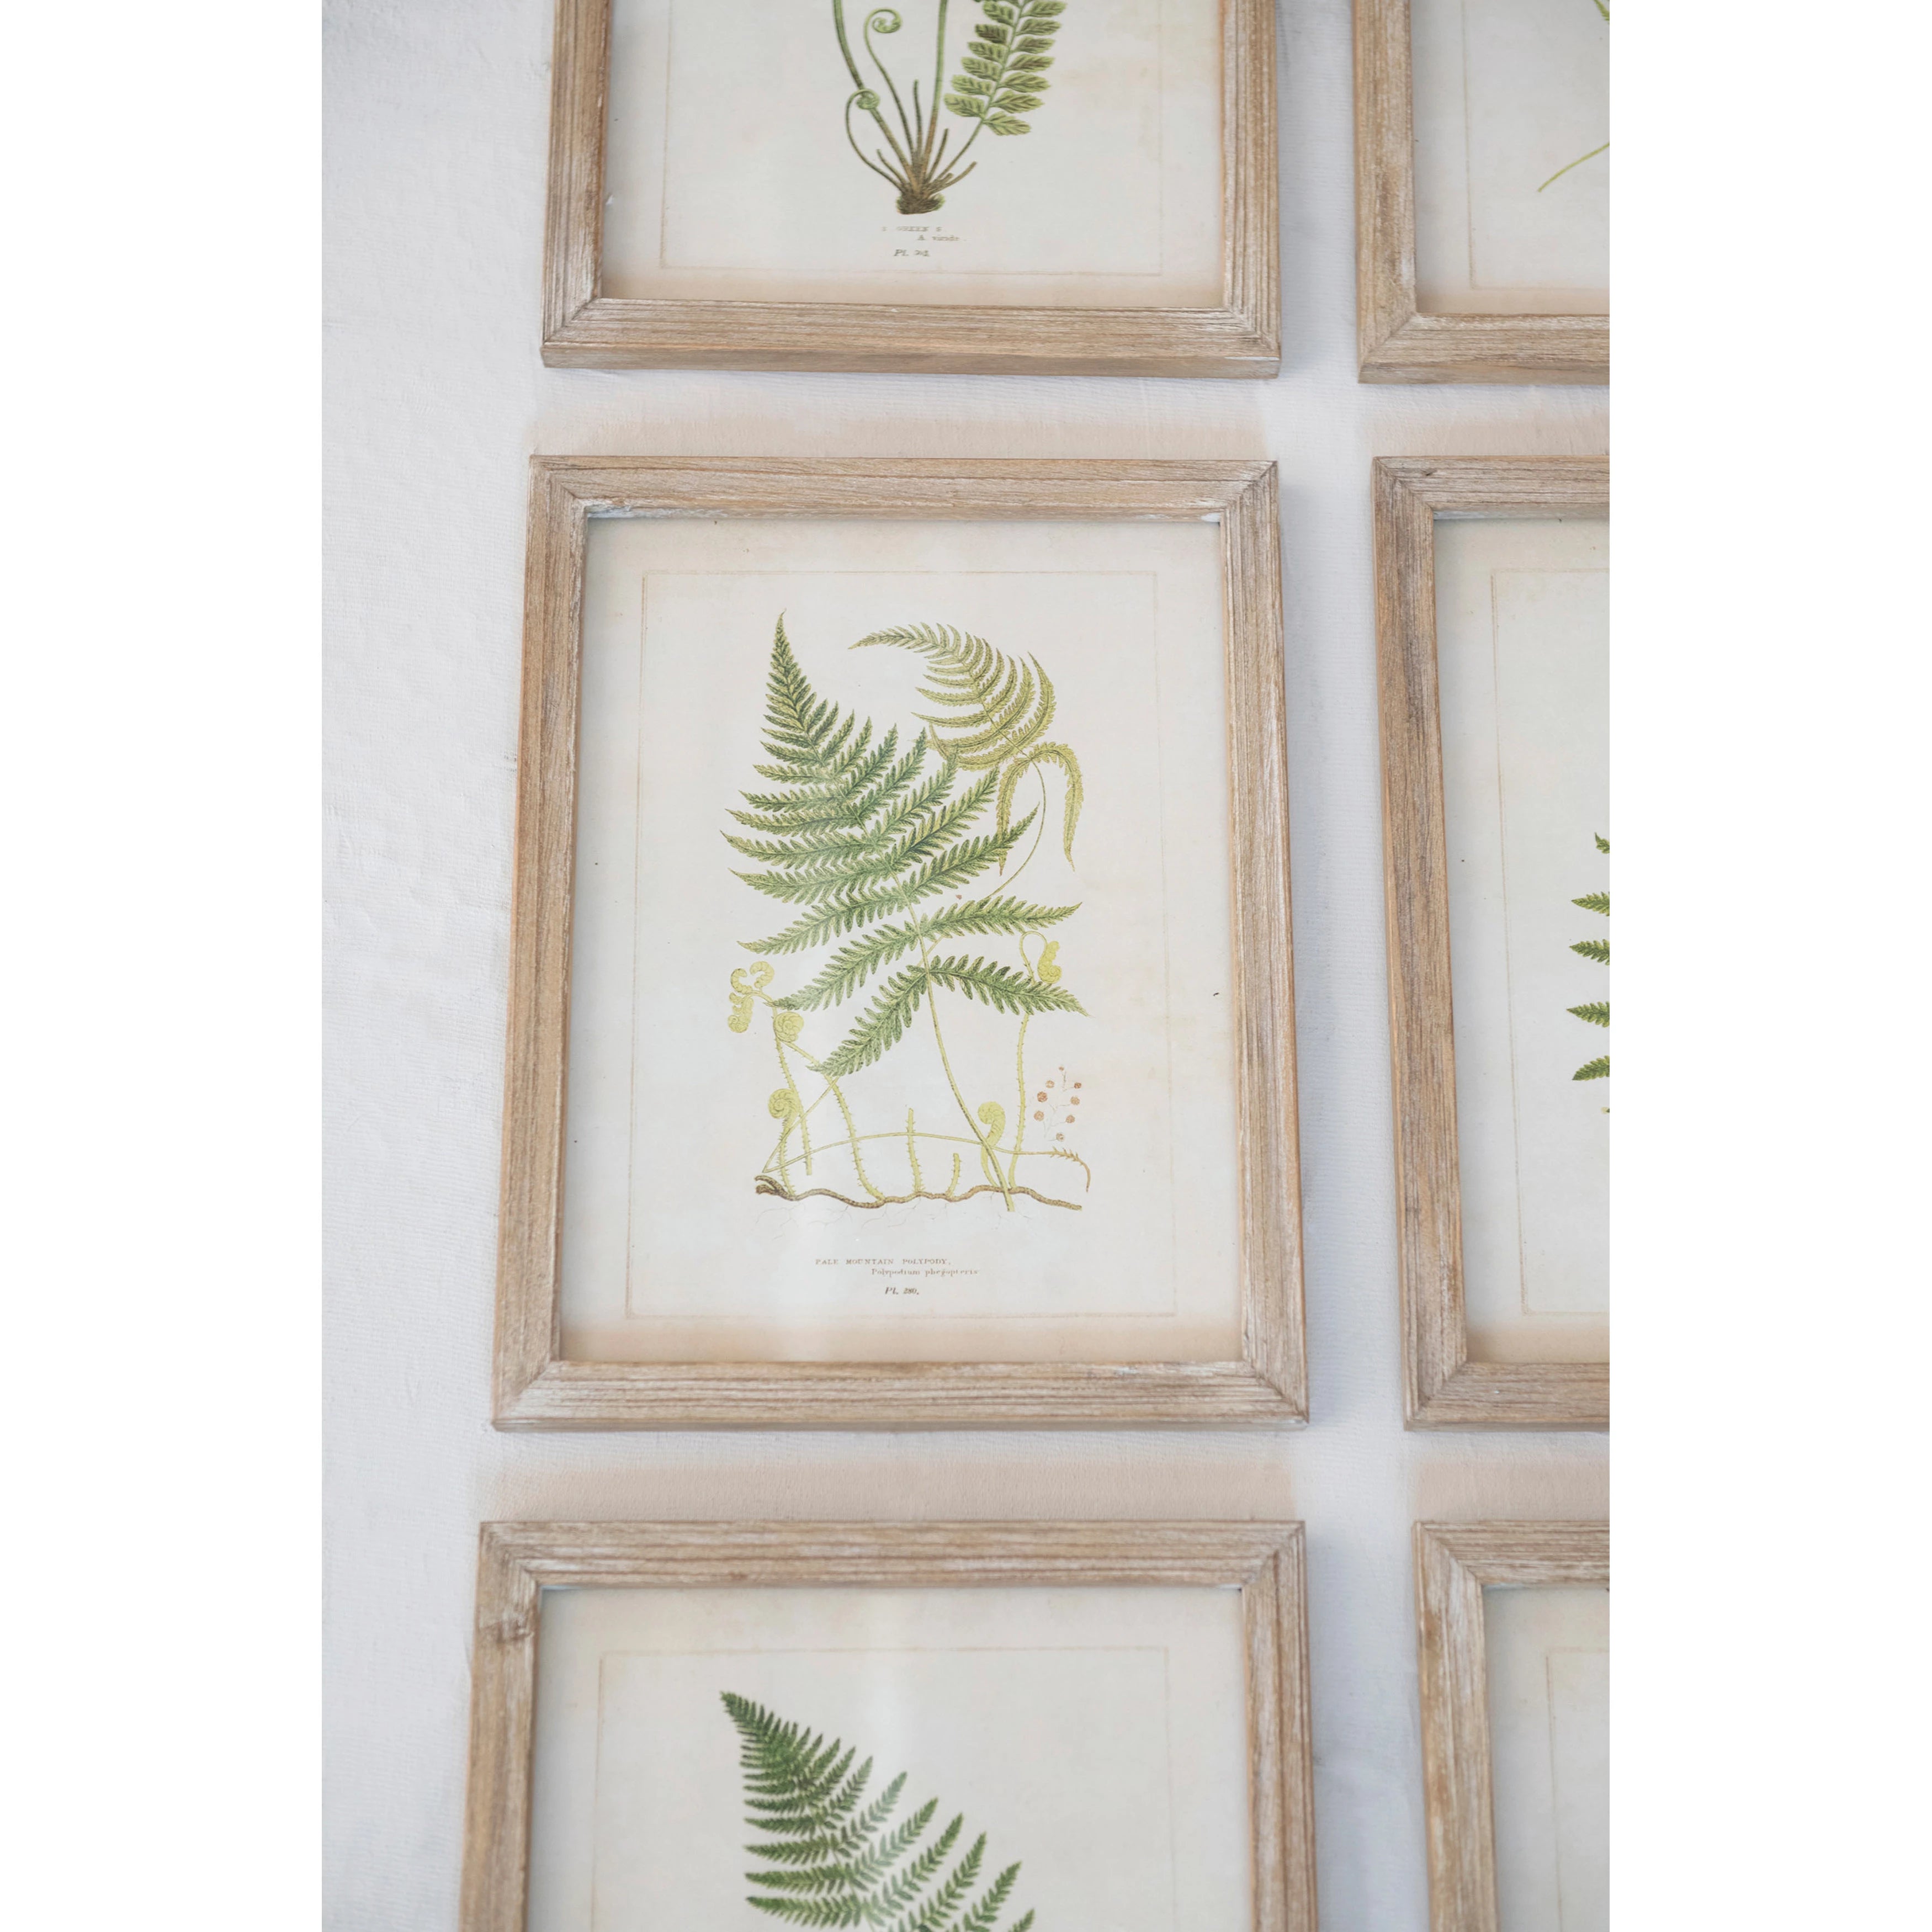 Wood Framed Glass Wall Décor with Fern Fronds Image, Six Styles